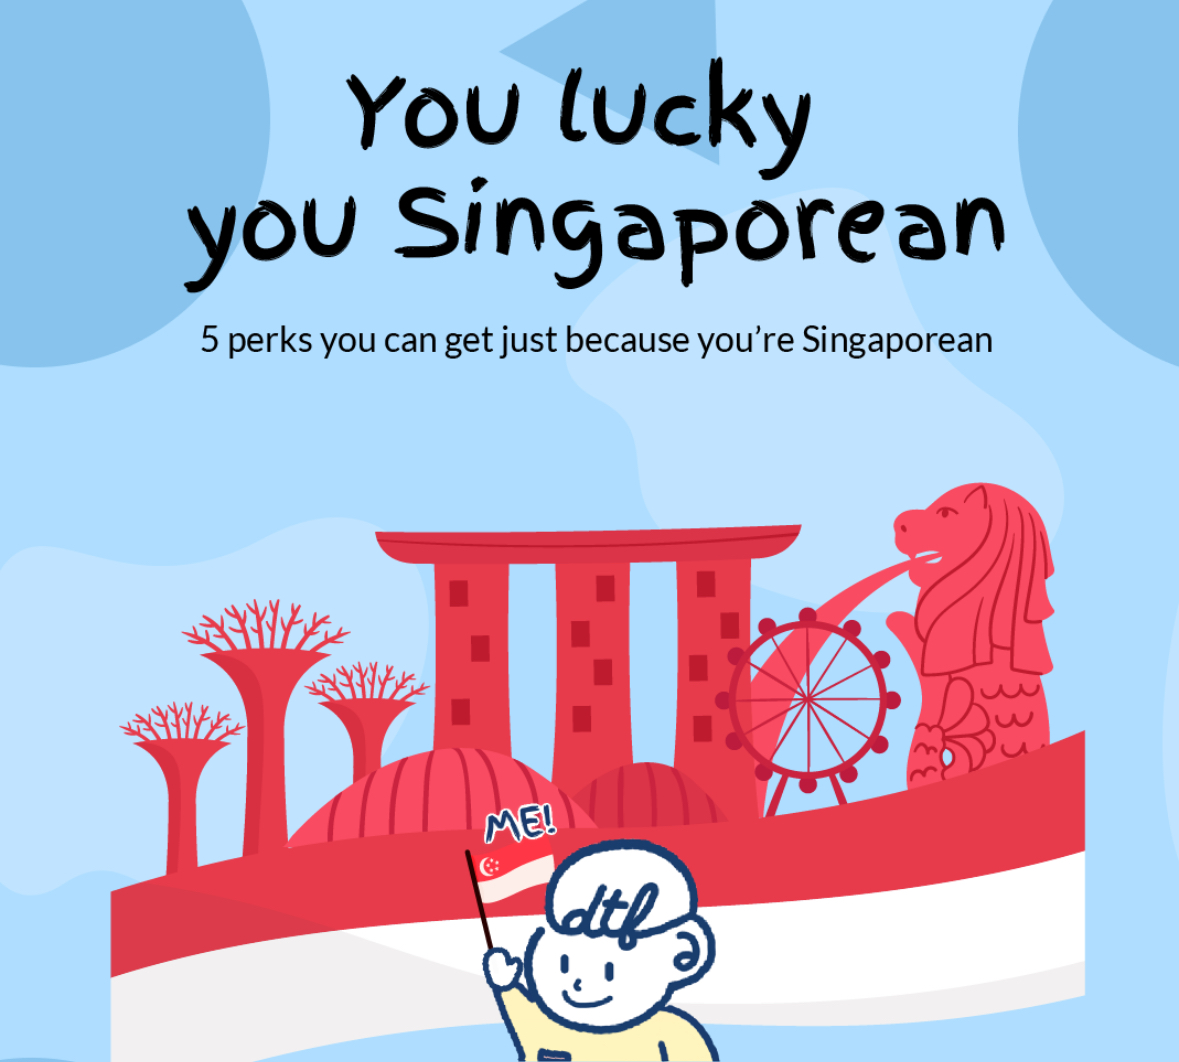 5 perks you can get just because you're Singaporean 